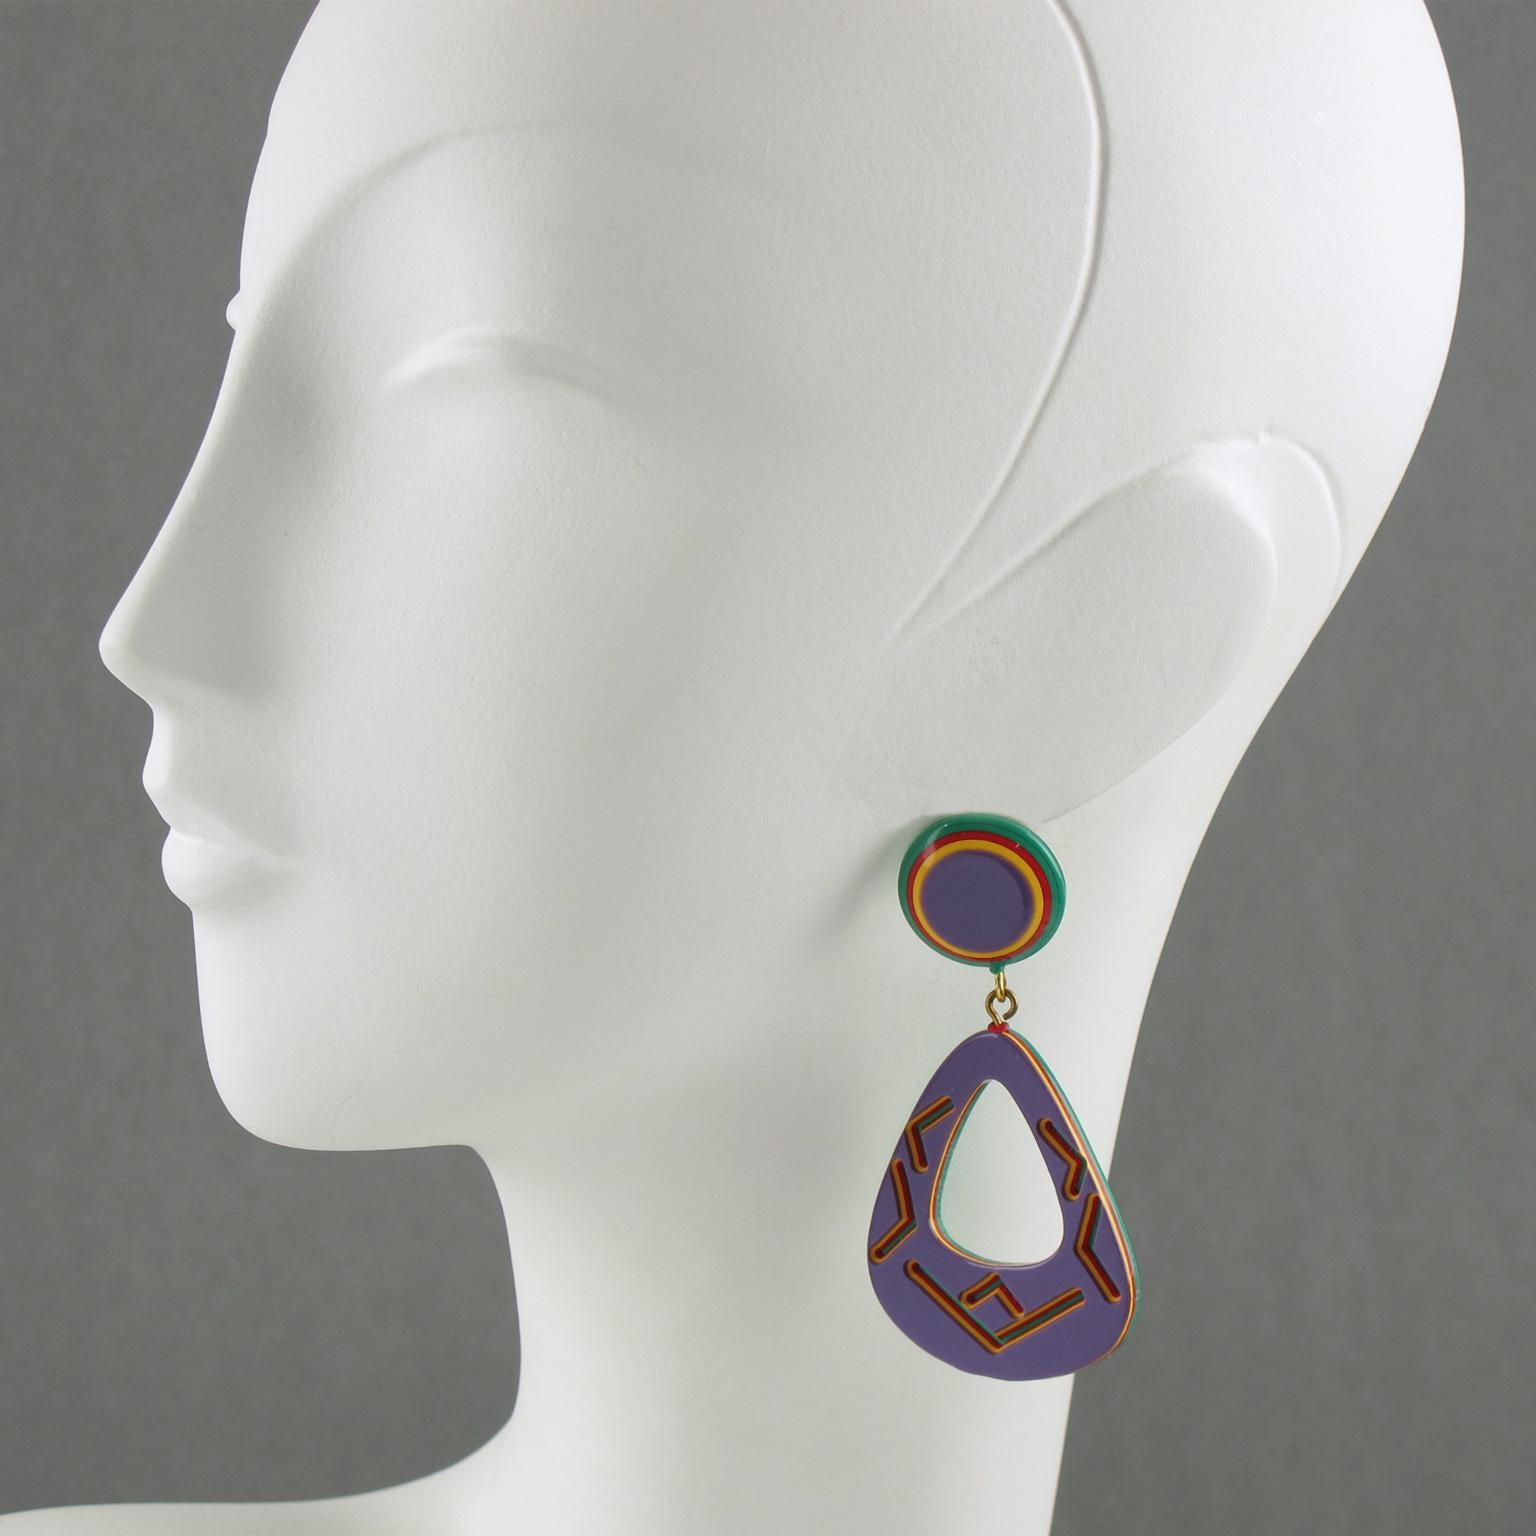 These lovely Lucite earrings are for pierced ears, and they feature a dangling chandelier shape with lamination and carved tribal motifs. The pieces boast purple, red, yellow, and green colors. There is no visible maker's mark. These earrings are